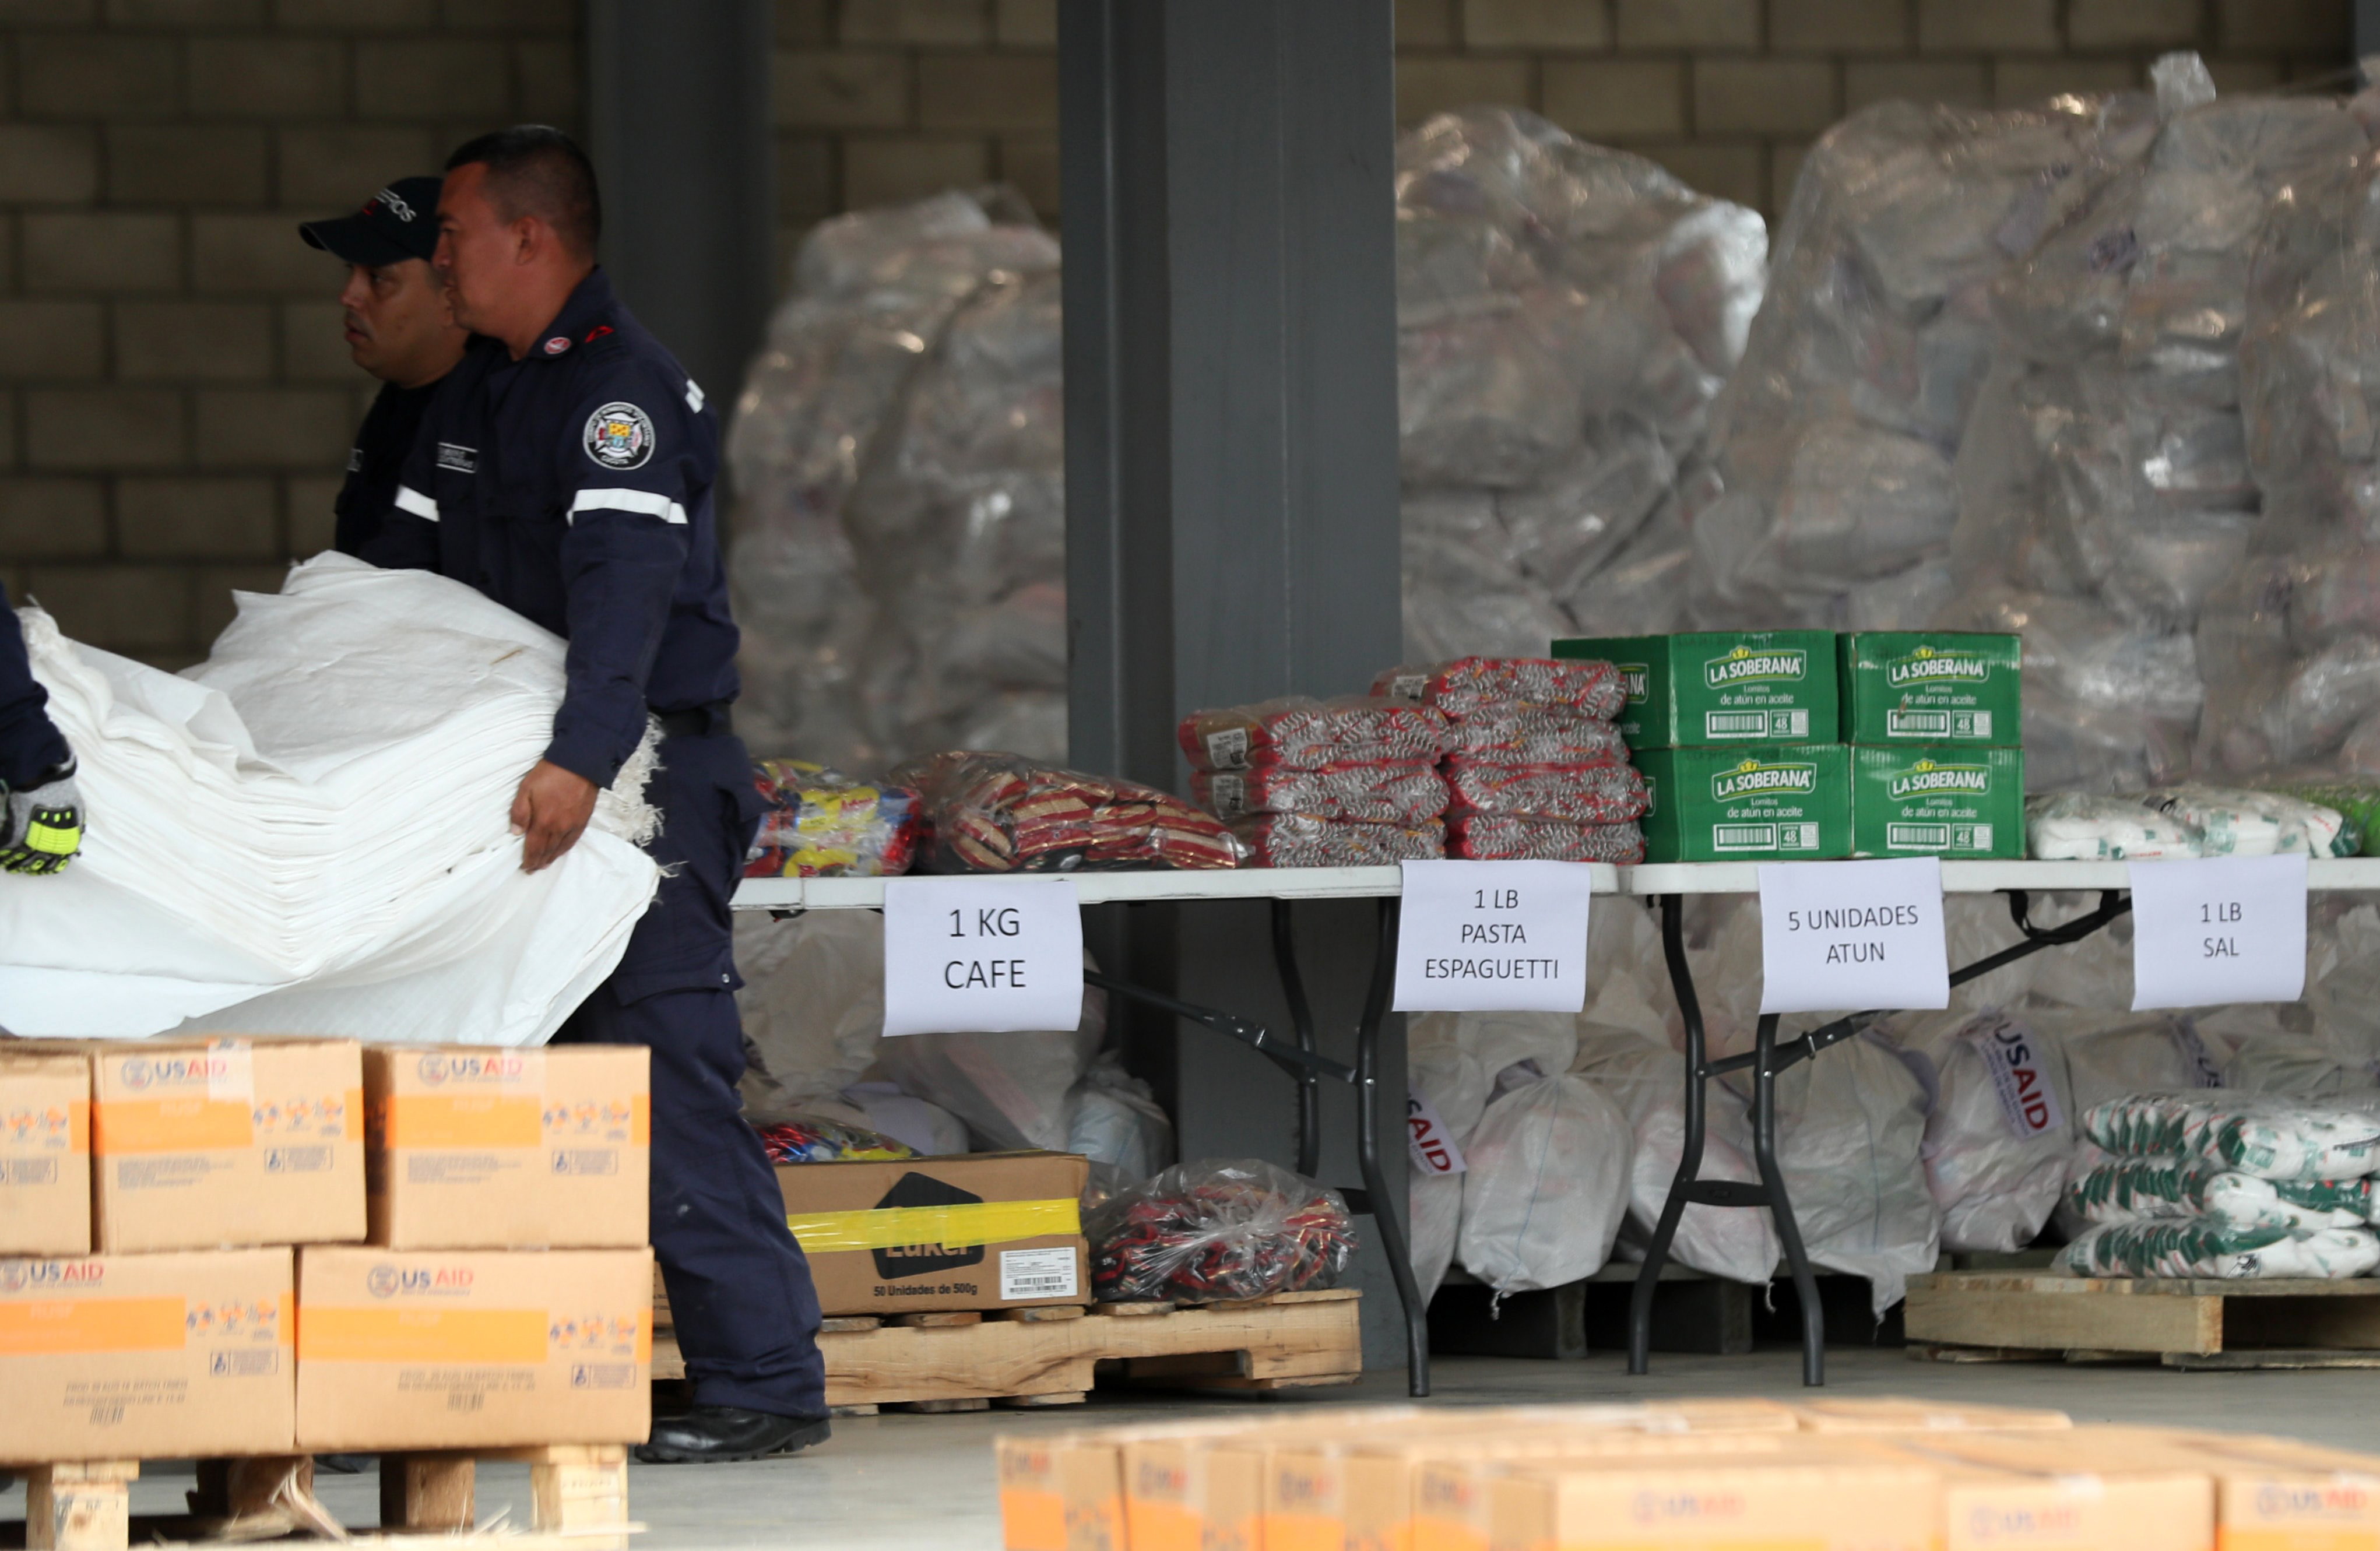 epa07352999 Authorities organize the shipment with humanitarian aid for Venezuela in a collection center located at the international bridge of Tienditas, in Cucuta, Colombia, 08 February 2019. The first trucks with humanitarian aid arrived the previous day to Cucuta, where officials work on logistics for its delivery.  EPA/MAURICIO DUENAS CASTADENAS